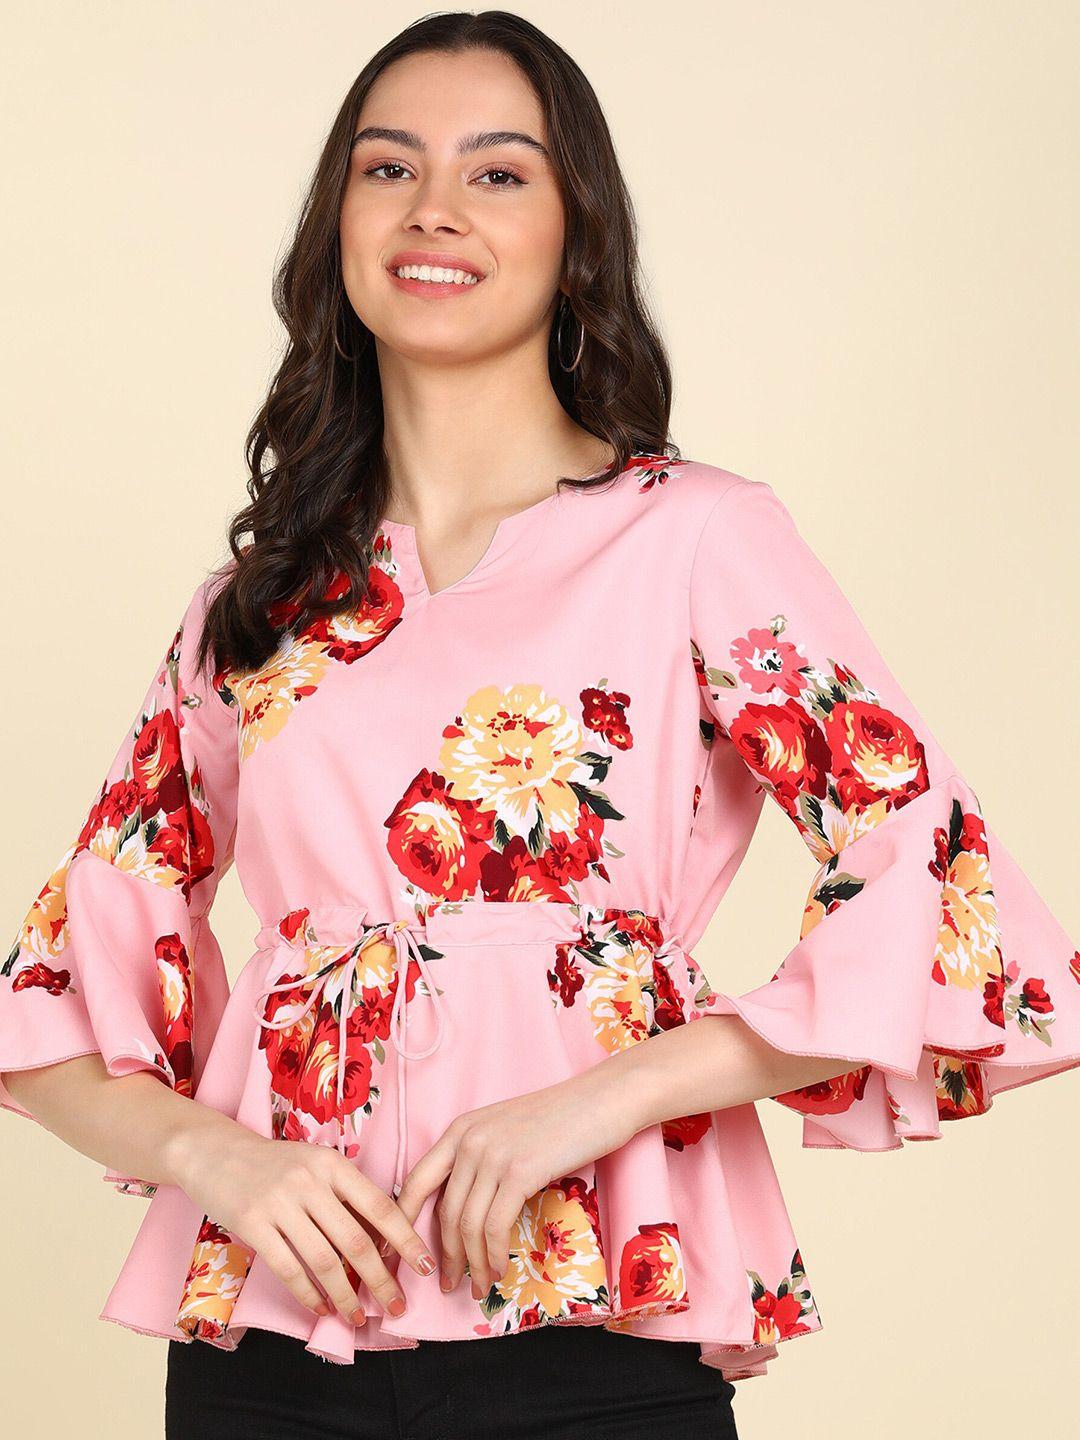 znx clothing floral printed notch neck bell sleeves empire top